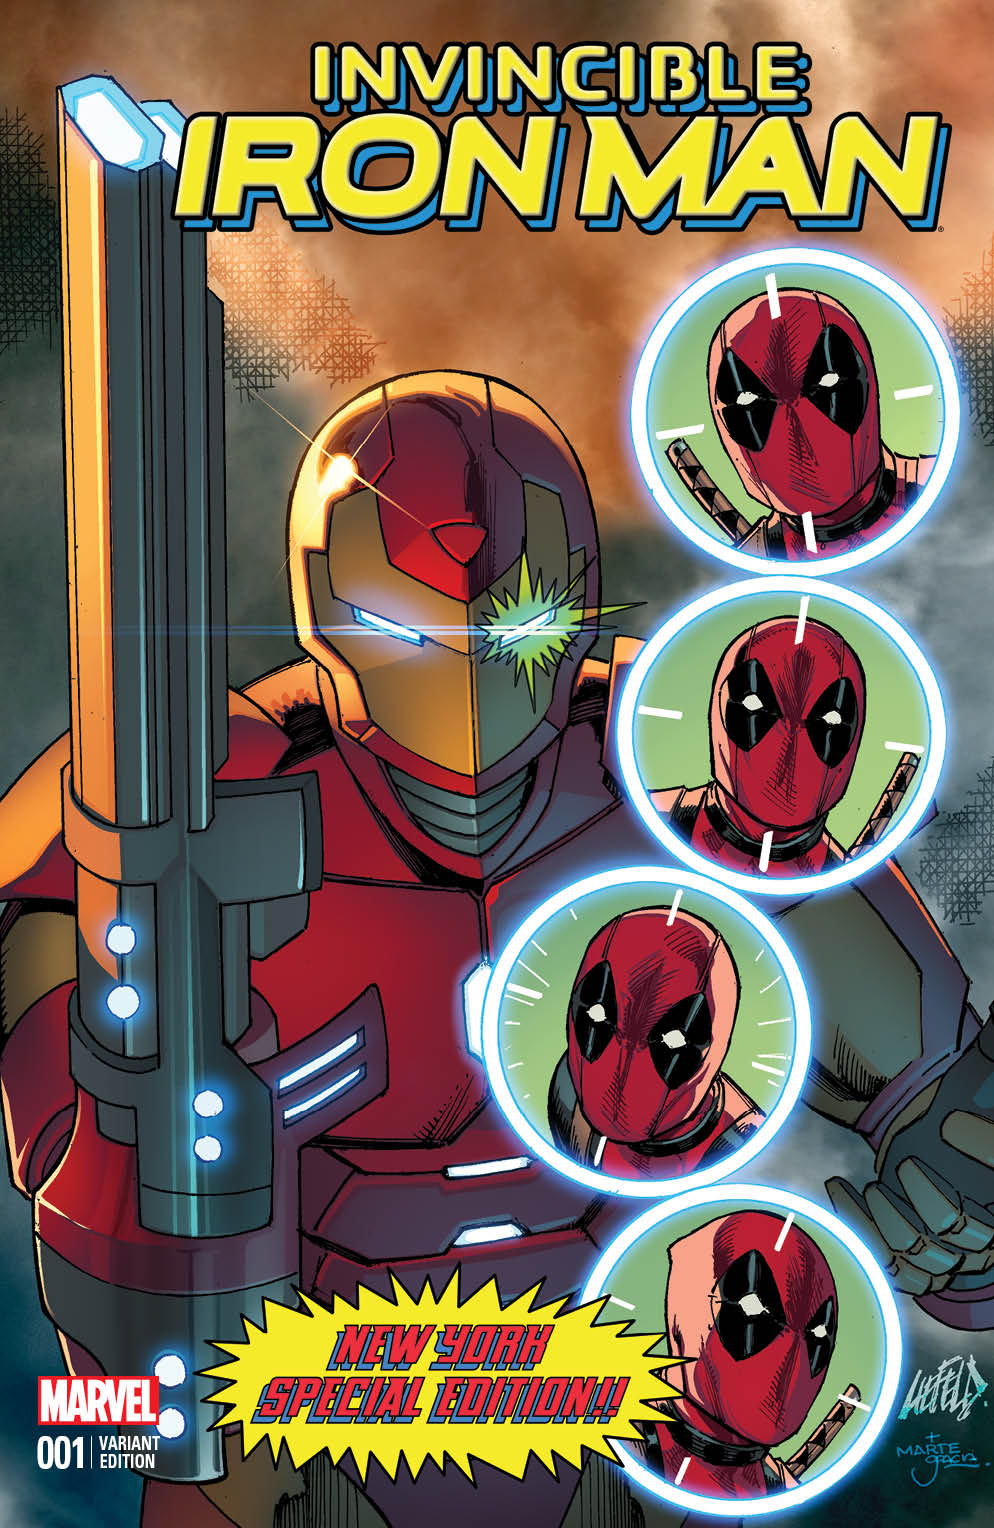 NYCC exclusive Deadpool variant cover for Incredible Iron man #1